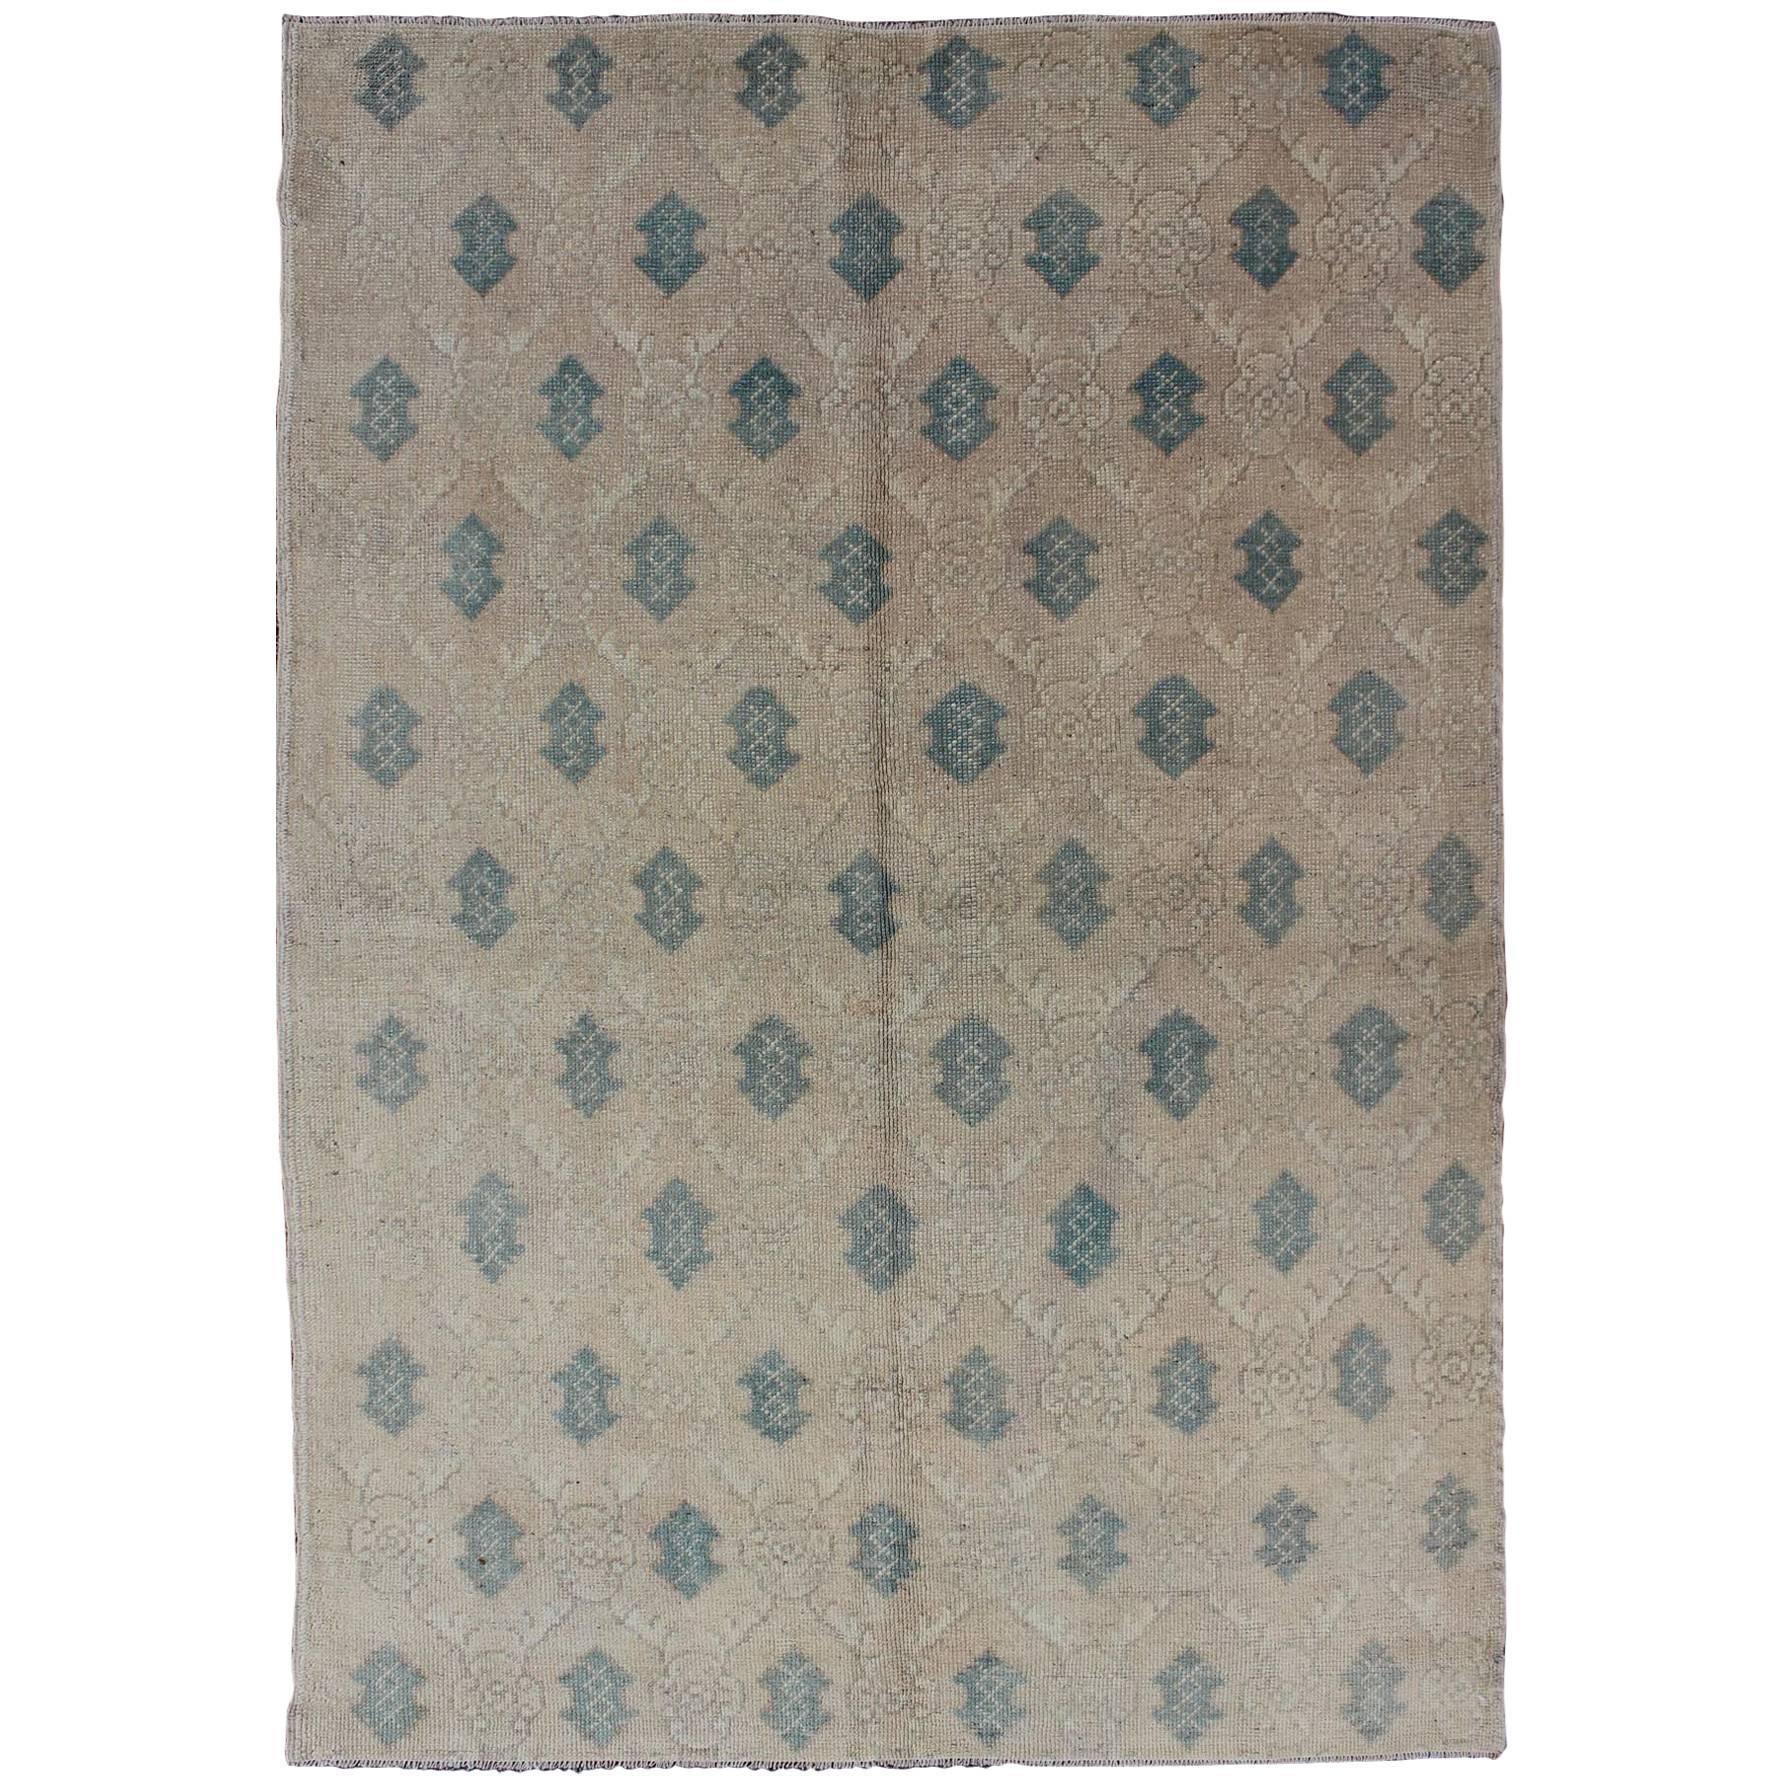 All-Over Design Vintage Turkish Oushak Rug in Shades of Cream and Teal For Sale